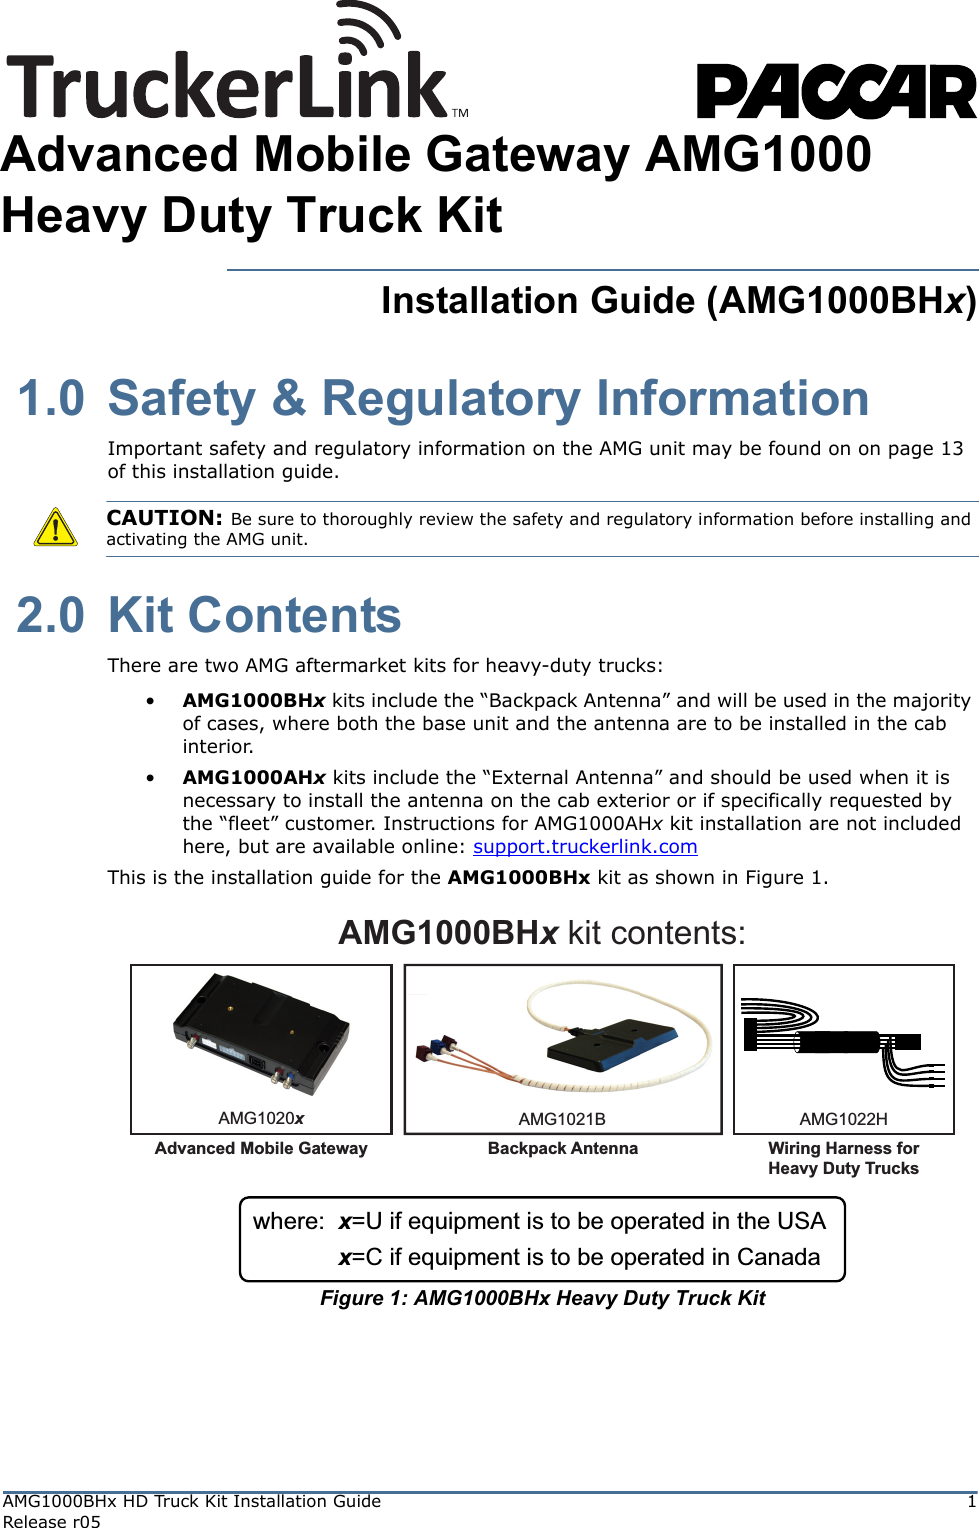 AMG1000BHx HD Truck Kit Installation Guide 1Release r05Installation Guide (AMG1000BHx) 1.0 Safety &amp; Regulatory InformationImportant safety and regulatory information on the AMG unit may be found on on page 13 of this installation guide. 2.0 Kit ContentsThere are two AMG aftermarket kits for heavy-duty trucks:•AMG1000BHx kits include the “Backpack Antenna” and will be used in the majority of cases, where both the base unit and the antenna are to be installed in the cab interior.•AMG1000AHx kits include the “External Antenna” and should be used when it is necessary to install the antenna on the cab exterior or if specifically requested by the “fleet” customer. Instructions for AMG1000AHx kit installation are not included here, but are available online: support.truckerlink.comThis is the installation guide for the AMG1000BHx kit as shown in Figure 1.Figure 1: AMG1000BHx Heavy Duty Truck KitCAUTION: Be sure to thoroughly review the safety and regulatory information before installing and activating the AMG unit.AMG1000BHx kit contents:AMG1020xAdvanced Mobile GatewayAMG1021BBackpack AntennaAMG1022HWiring Harness forHeavy Duty Trucksx=U if equipment is to be operated in the USAwhere:x=C if equipment is to be operated in CanadaAdvanced Mobile Gateway AMG1000Heavy Duty Truck Kit